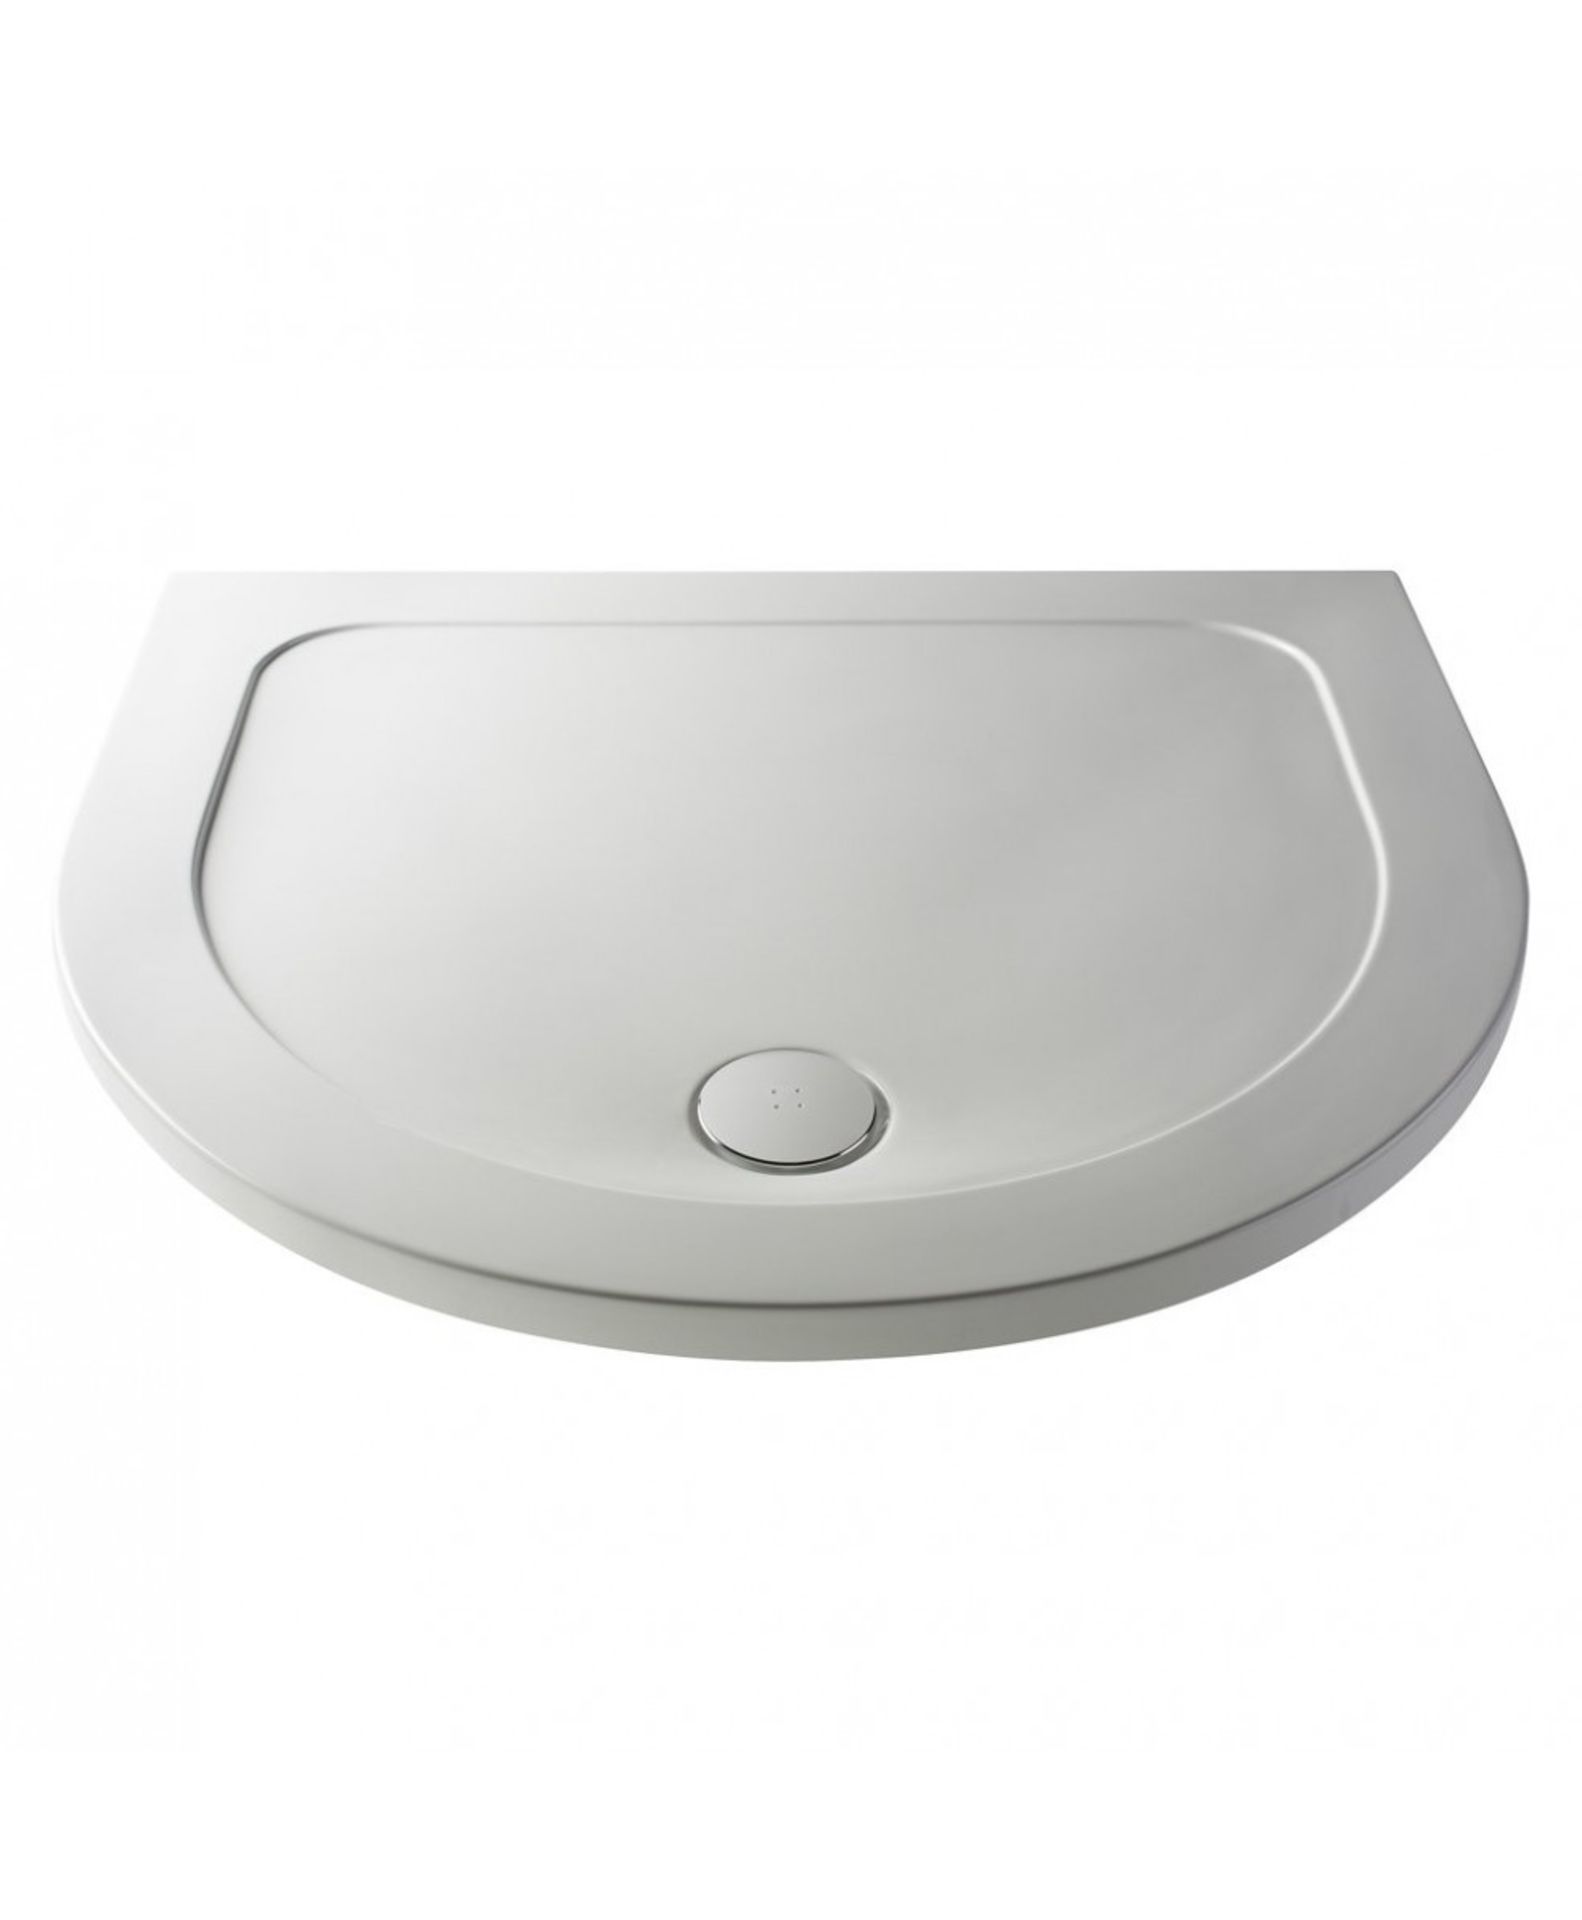 Brand New (PC41) Twyfords 770mm Hydro D Shape White Shower tray. Low profile ultra slim design Gel c - Image 2 of 3